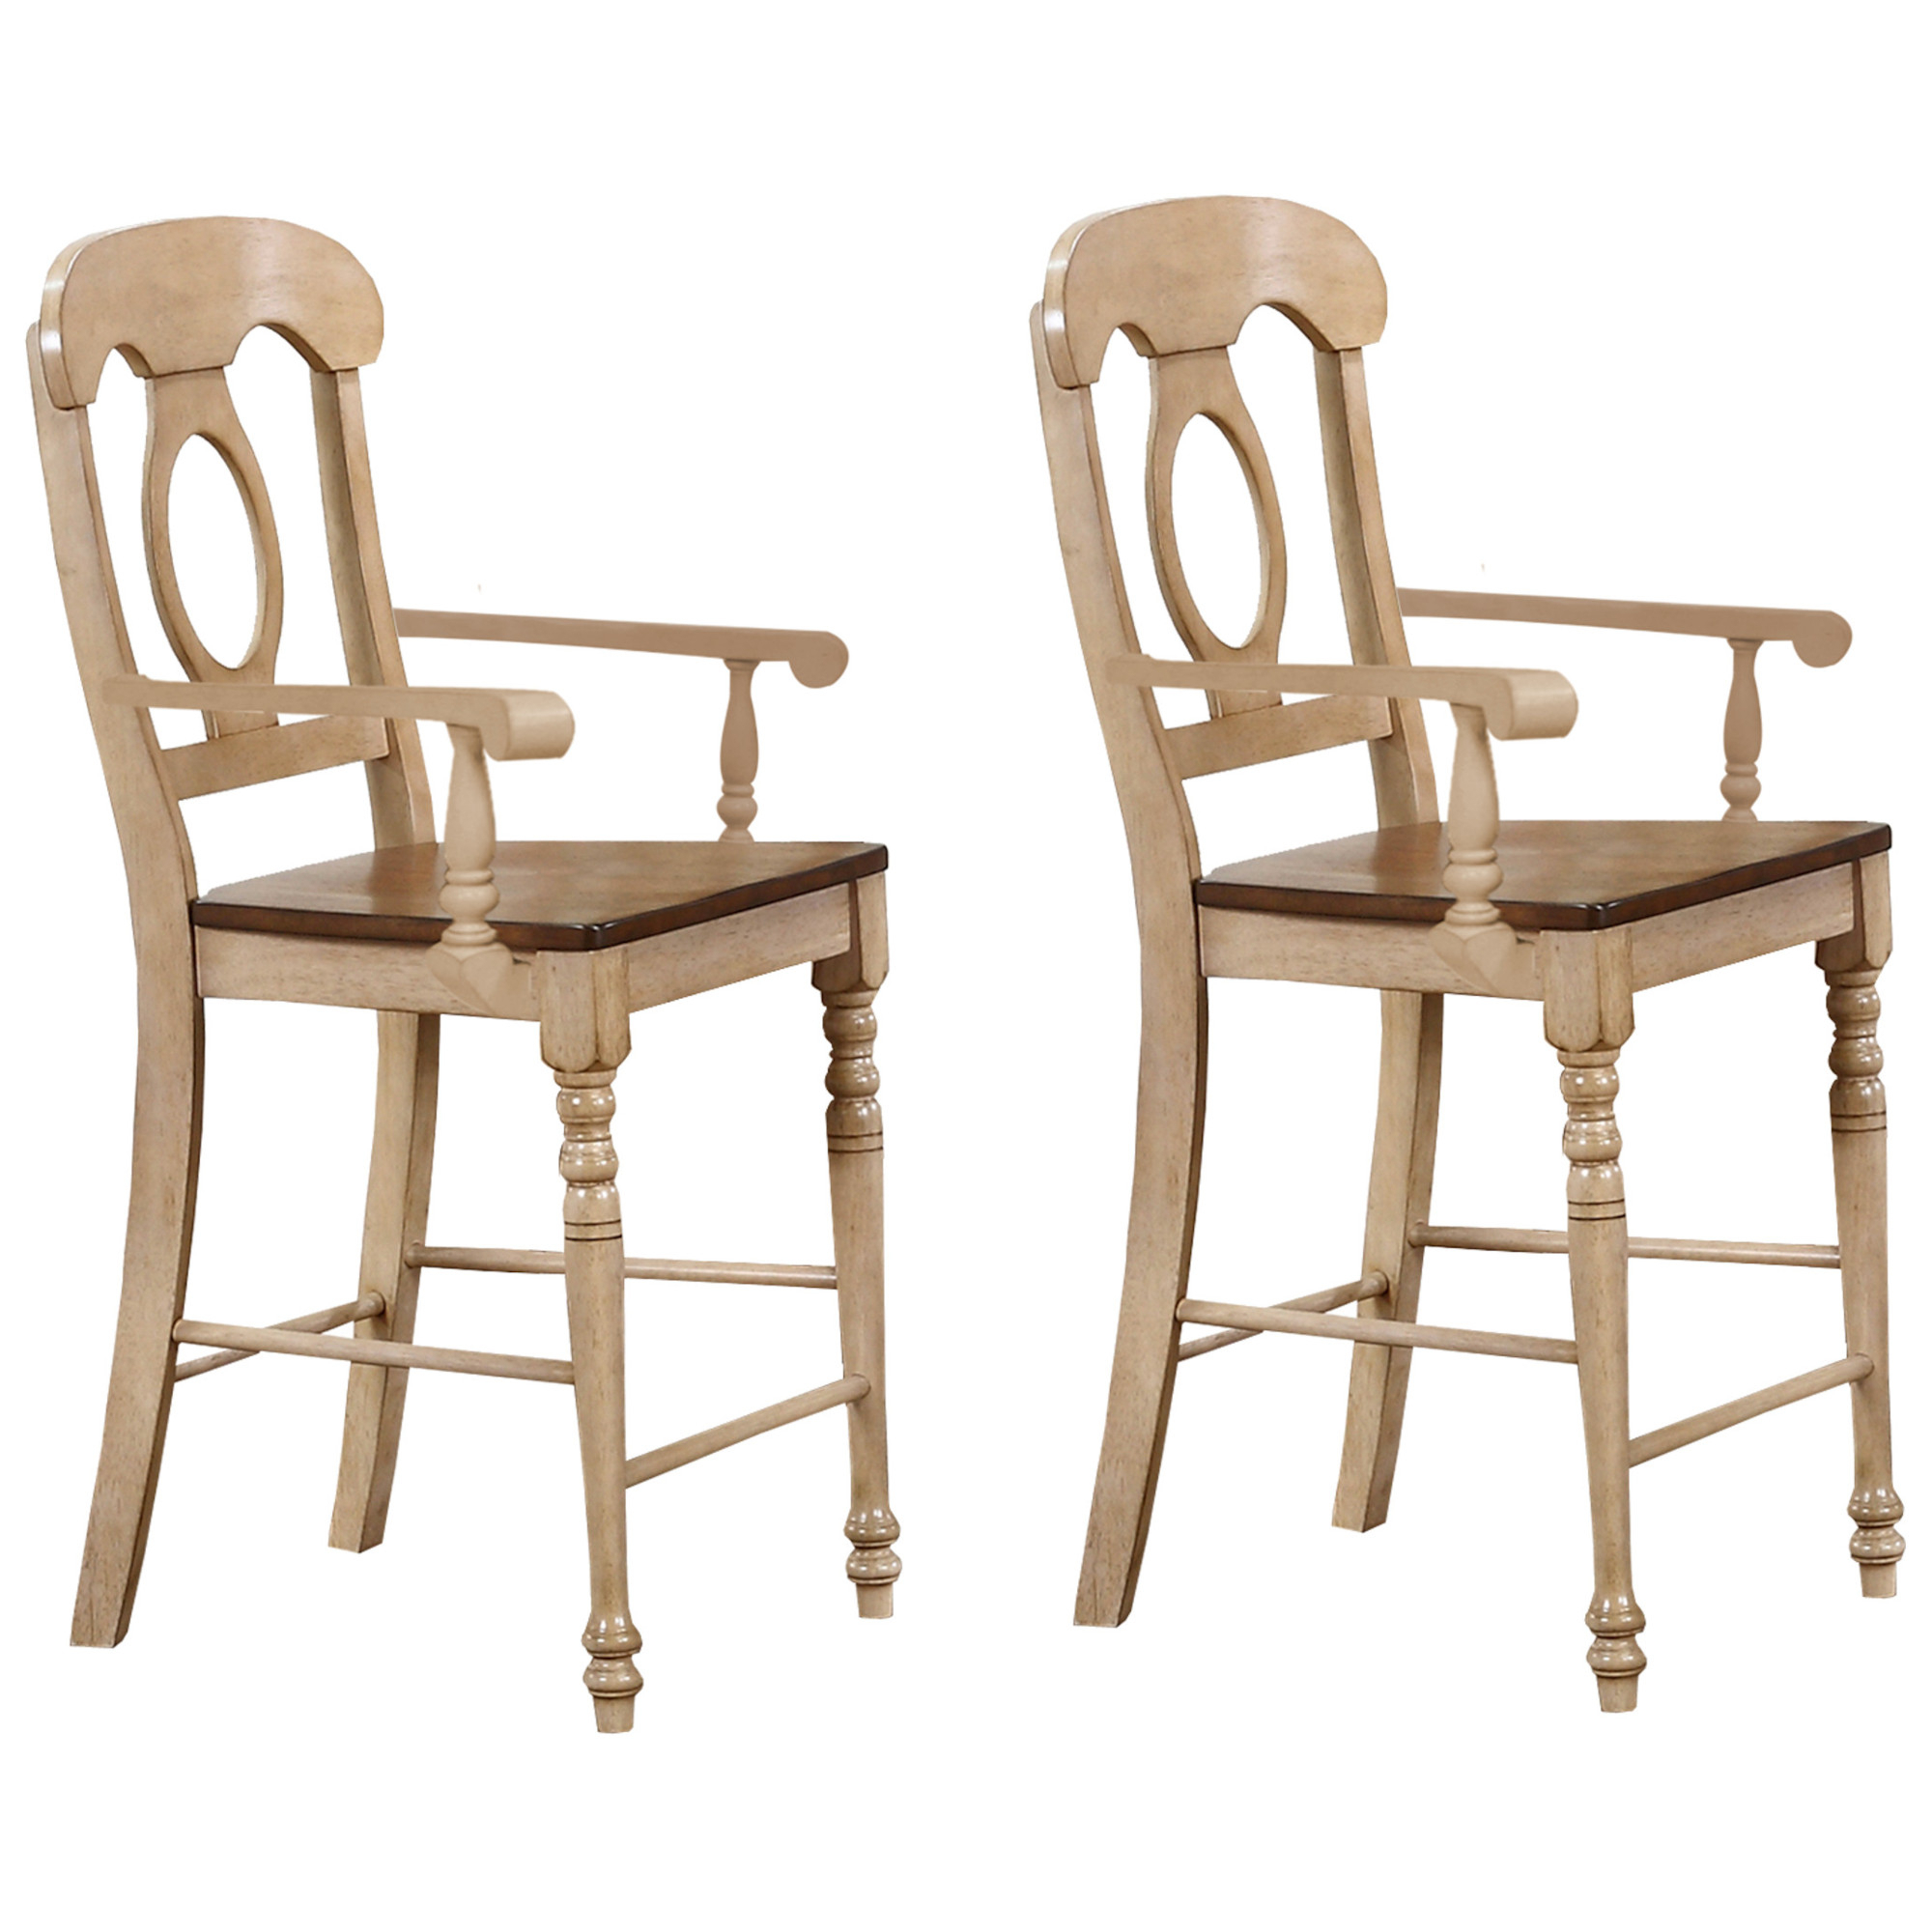 Brook 43 in. Distressed Two Tone Light Creamy Wheat with Warm Pecan Brown High Back Wood Frame 24 in. Bar Stool (Set of 2)